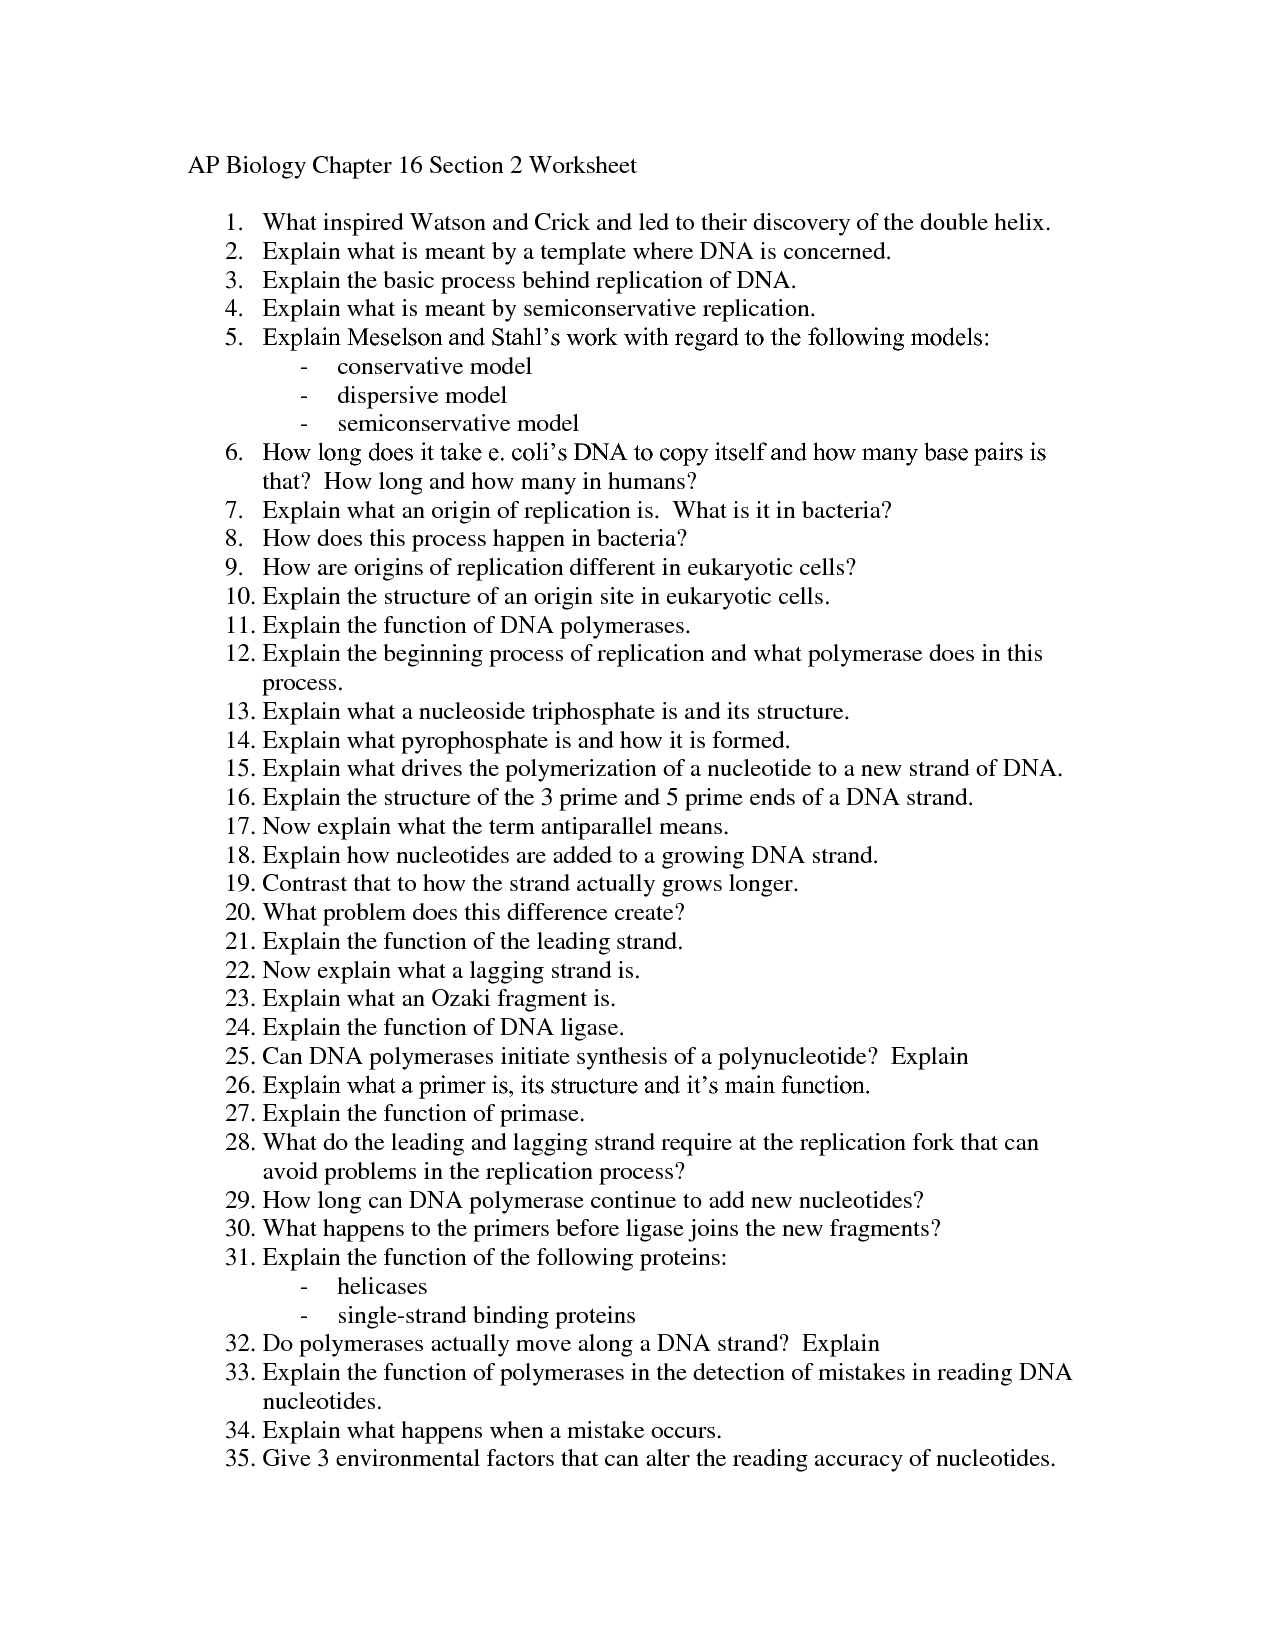 Pearson Education Biology Worksheet Answers Image